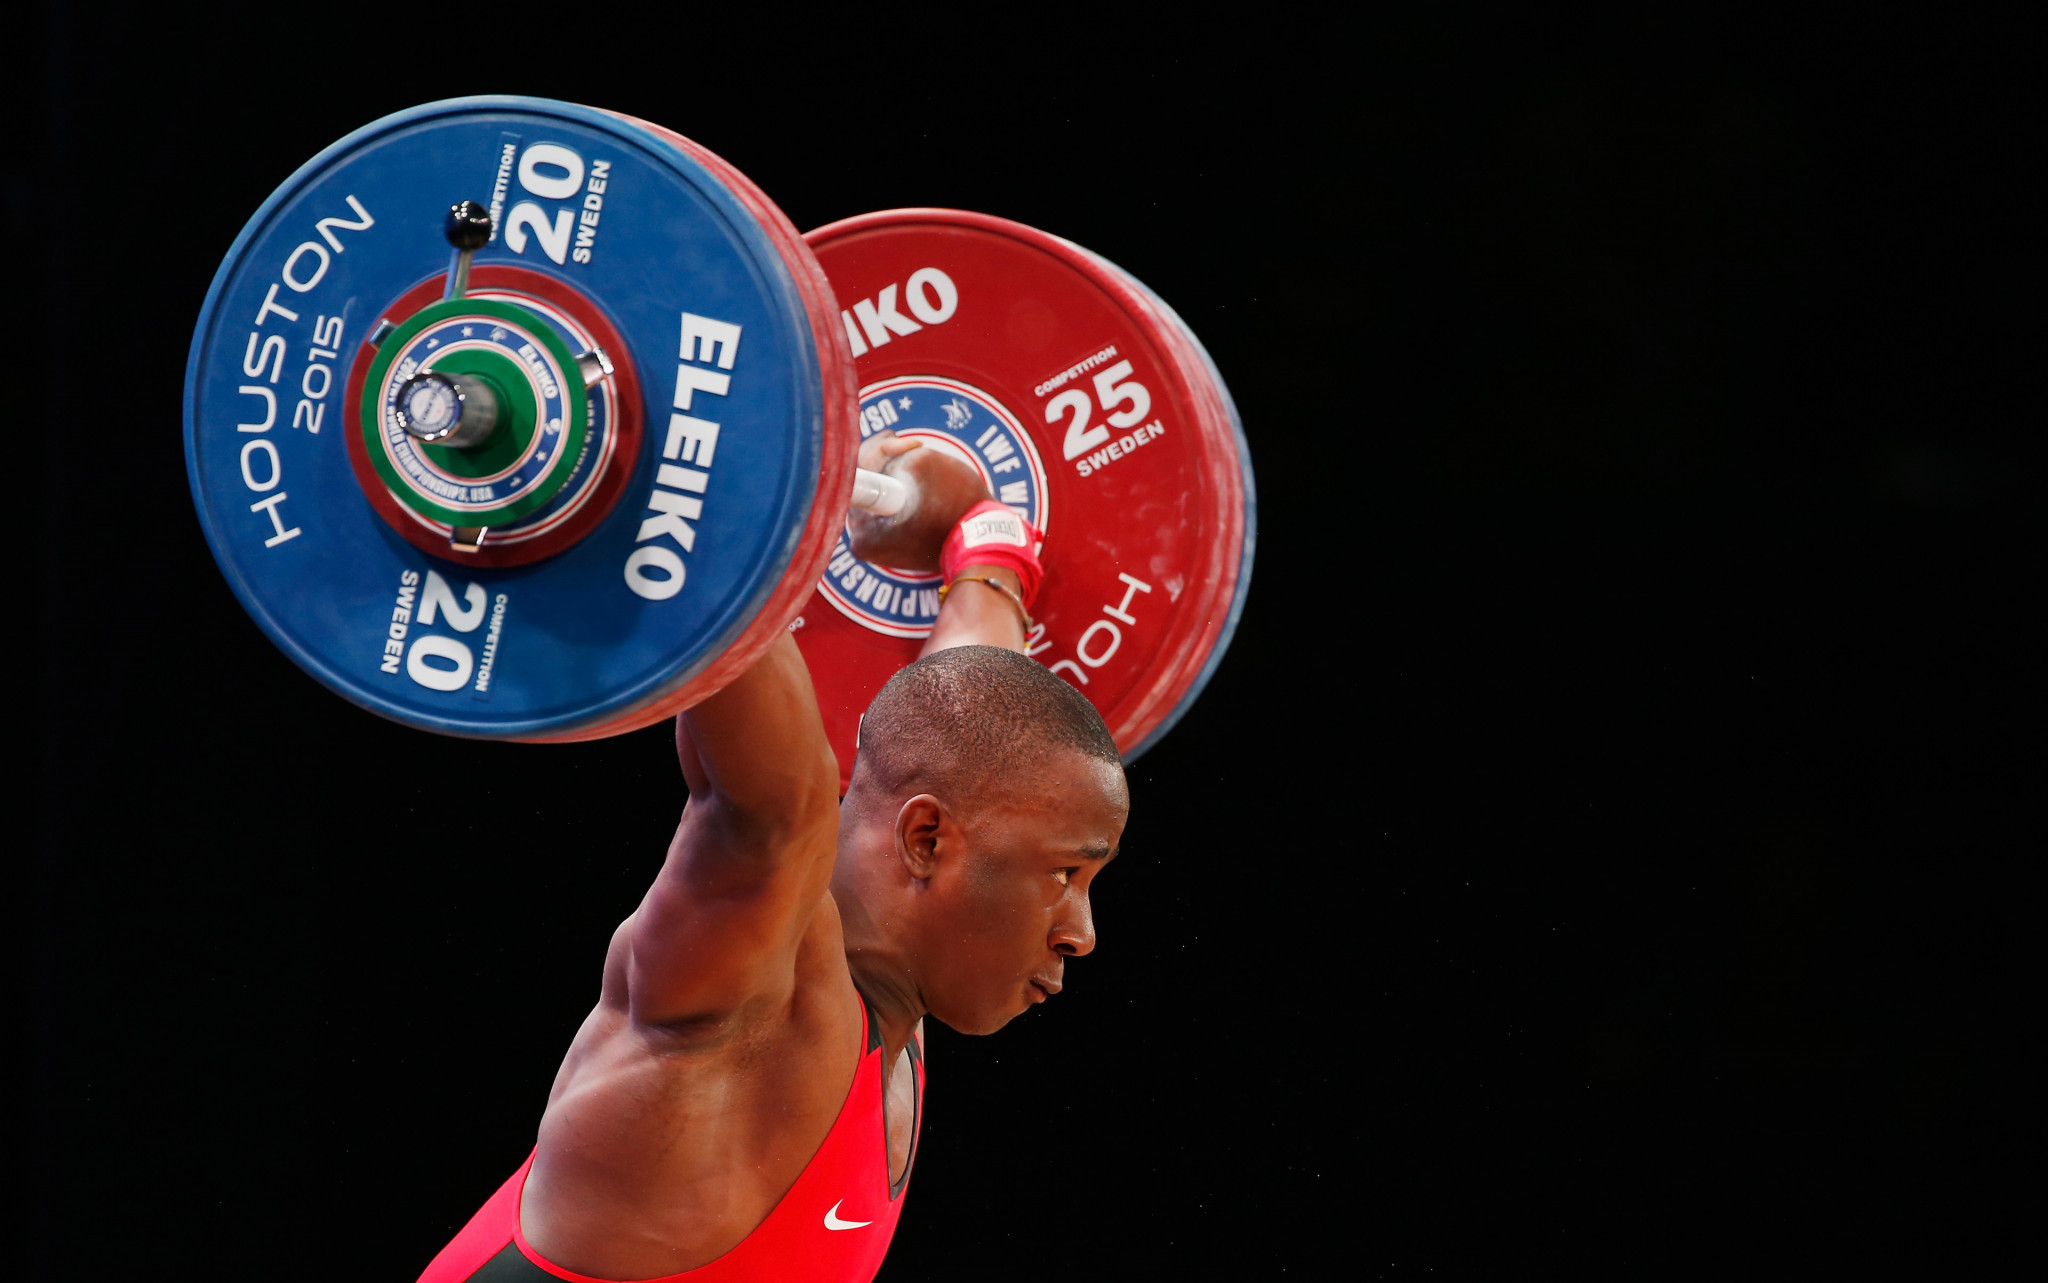 Weightlifting world record for Colombia's Paredes as Olympic champion Meso beaten